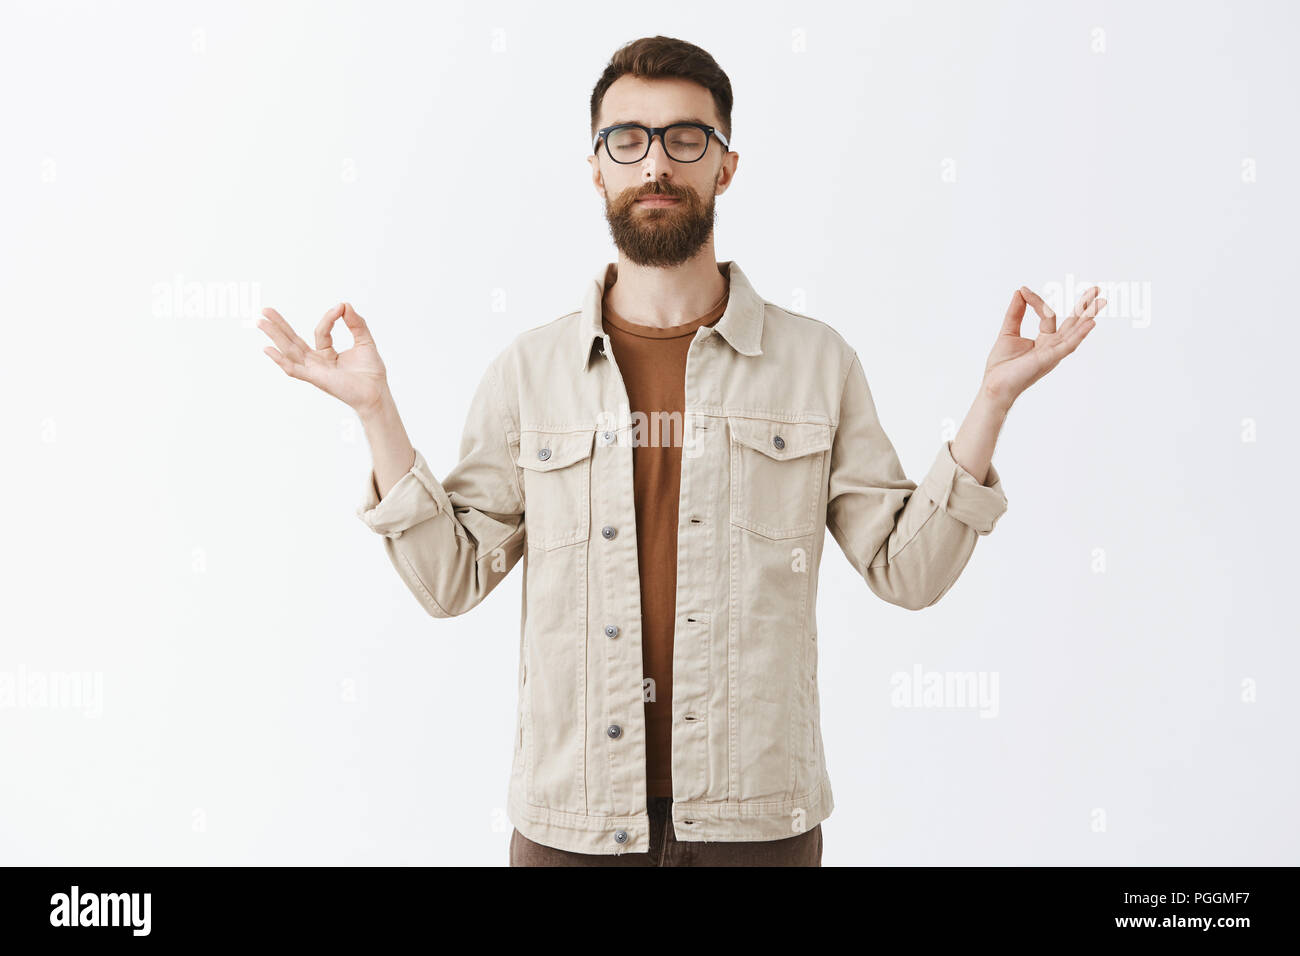 Calming down with yoga. Portrait of relieved peaceful good-looking urban guy in jacket with long sick beard closing eyes spreading hands in zen gesture meditating to restore peace and patience Stock Photo